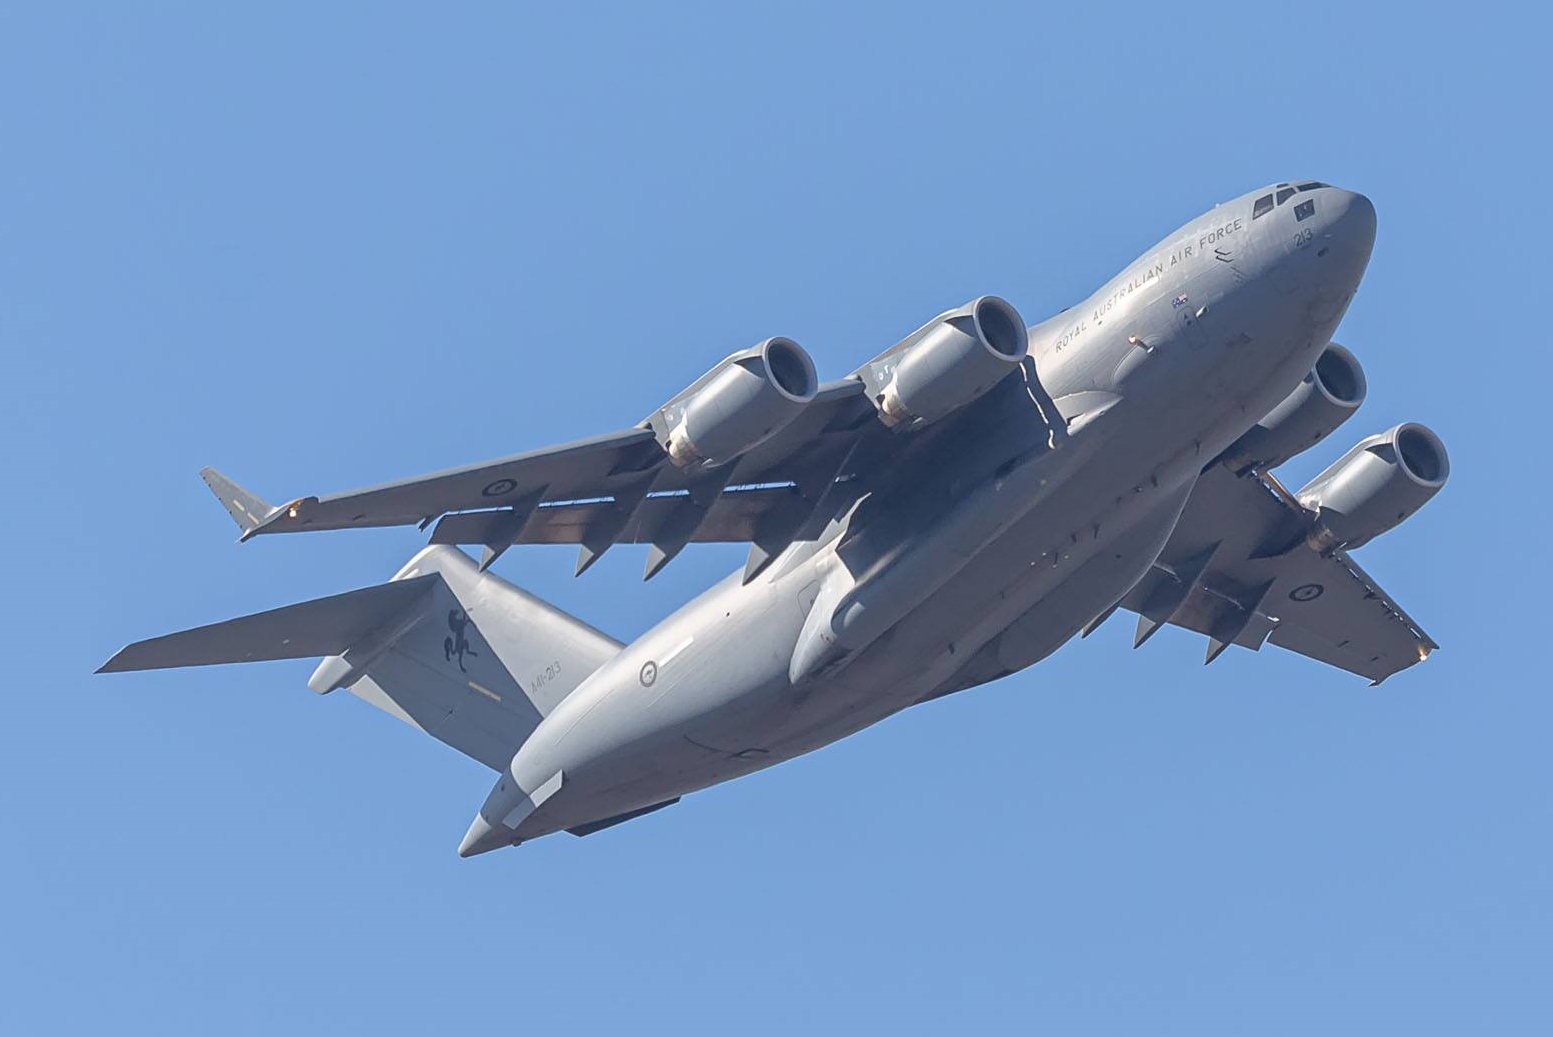 Queensland Plane Spotting: Royal Australian Force (RAAF) Boeing C-17A Globemaster III A41-213 "Stallion 62” Spotted Completing Airwork at Rockhampton Airport Plus More!